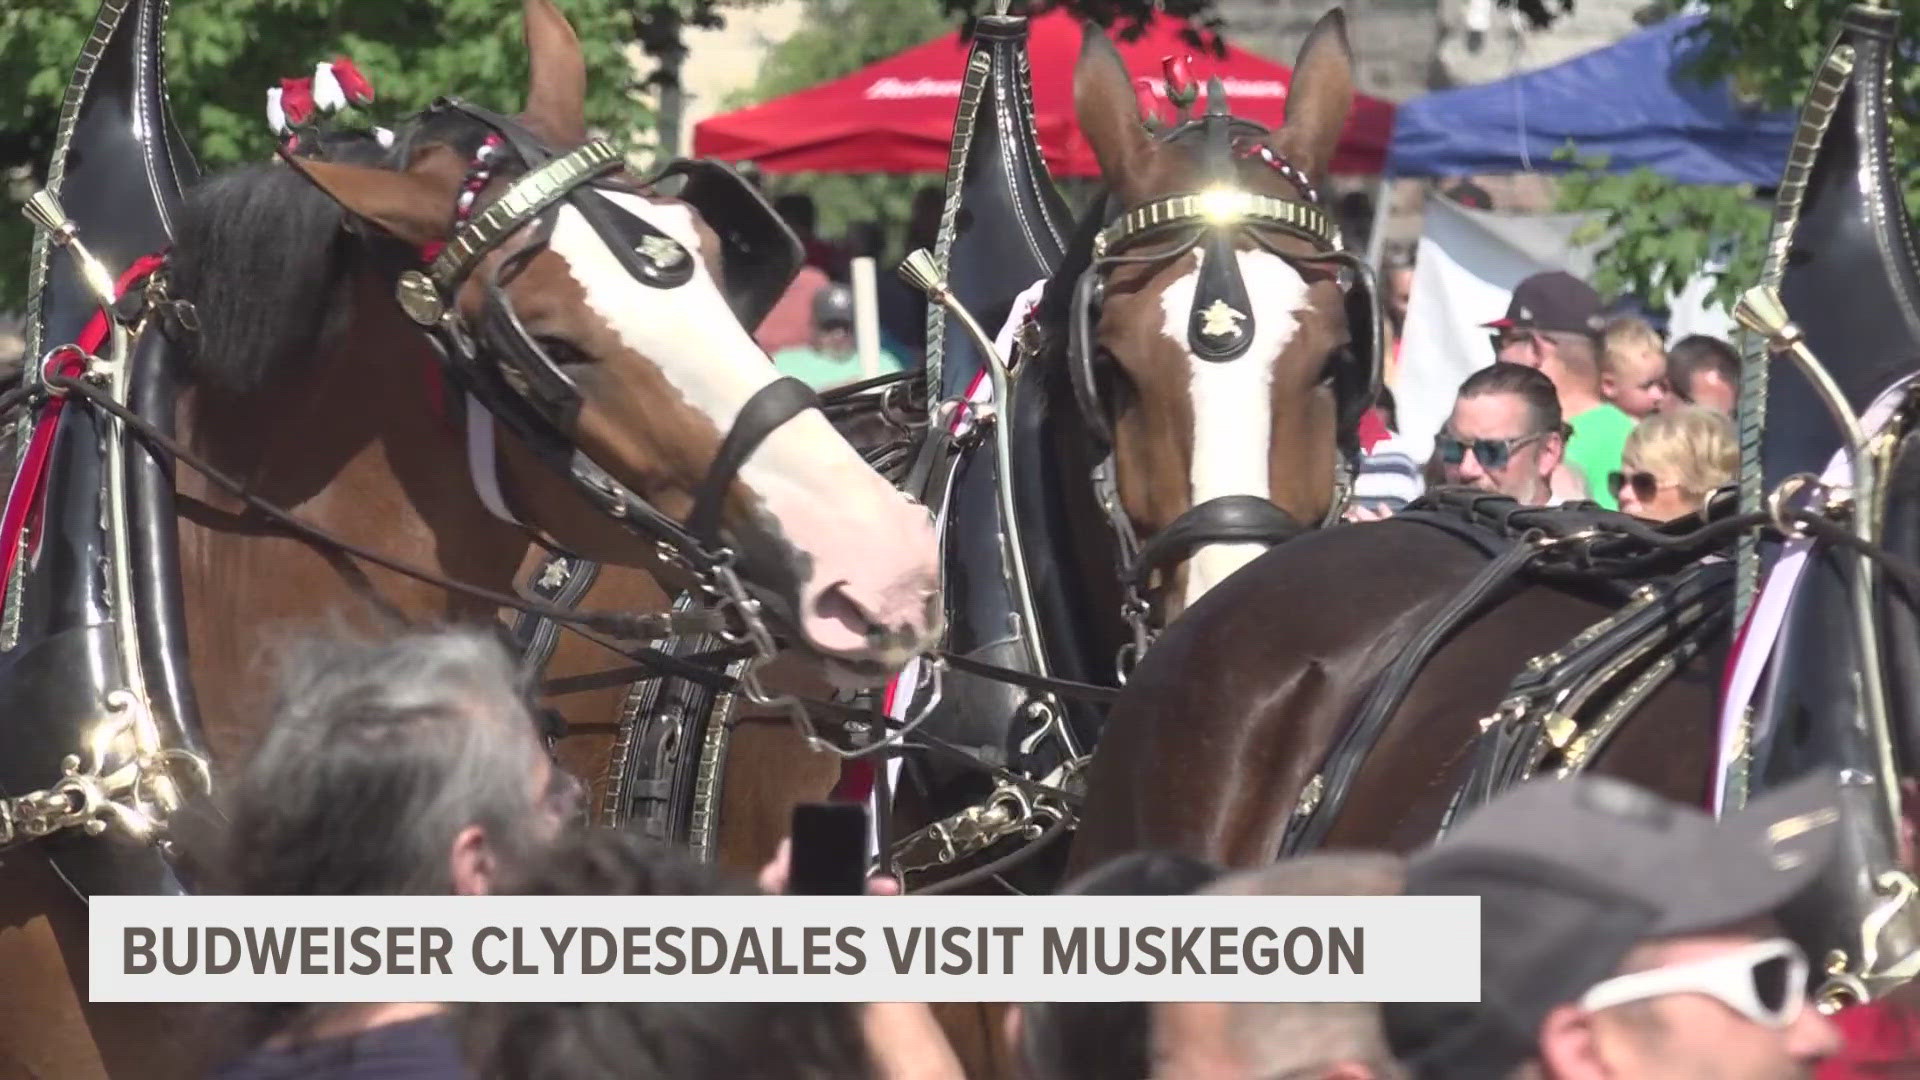 The iconic horses stopped into Muskegon.